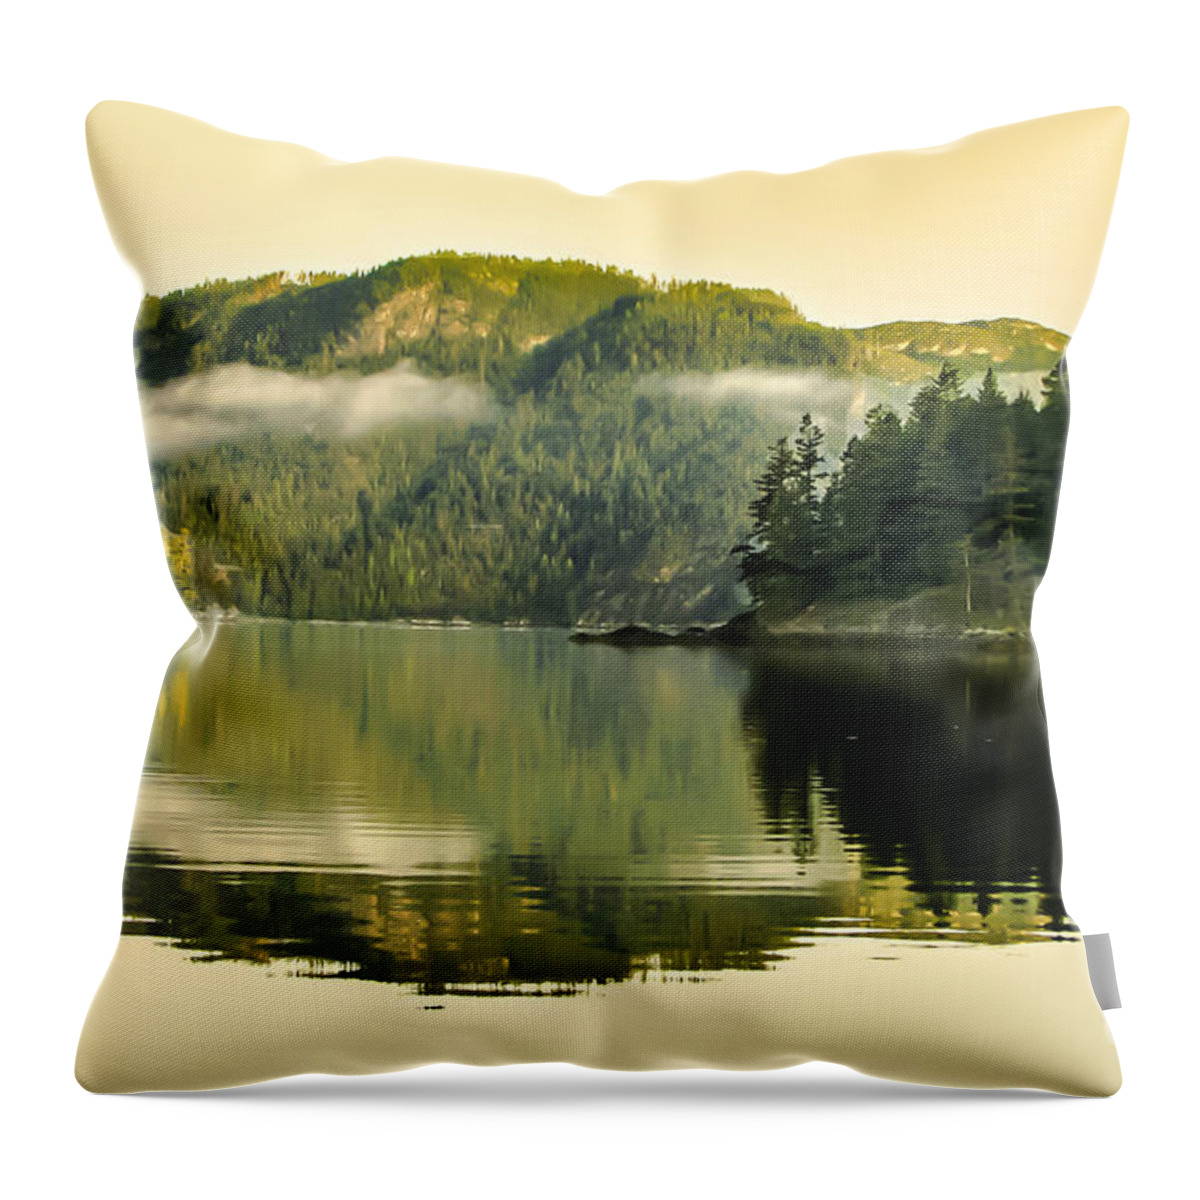 Reflections Throw Pillow featuring the photograph Early Morning Reflections by Robert Bales